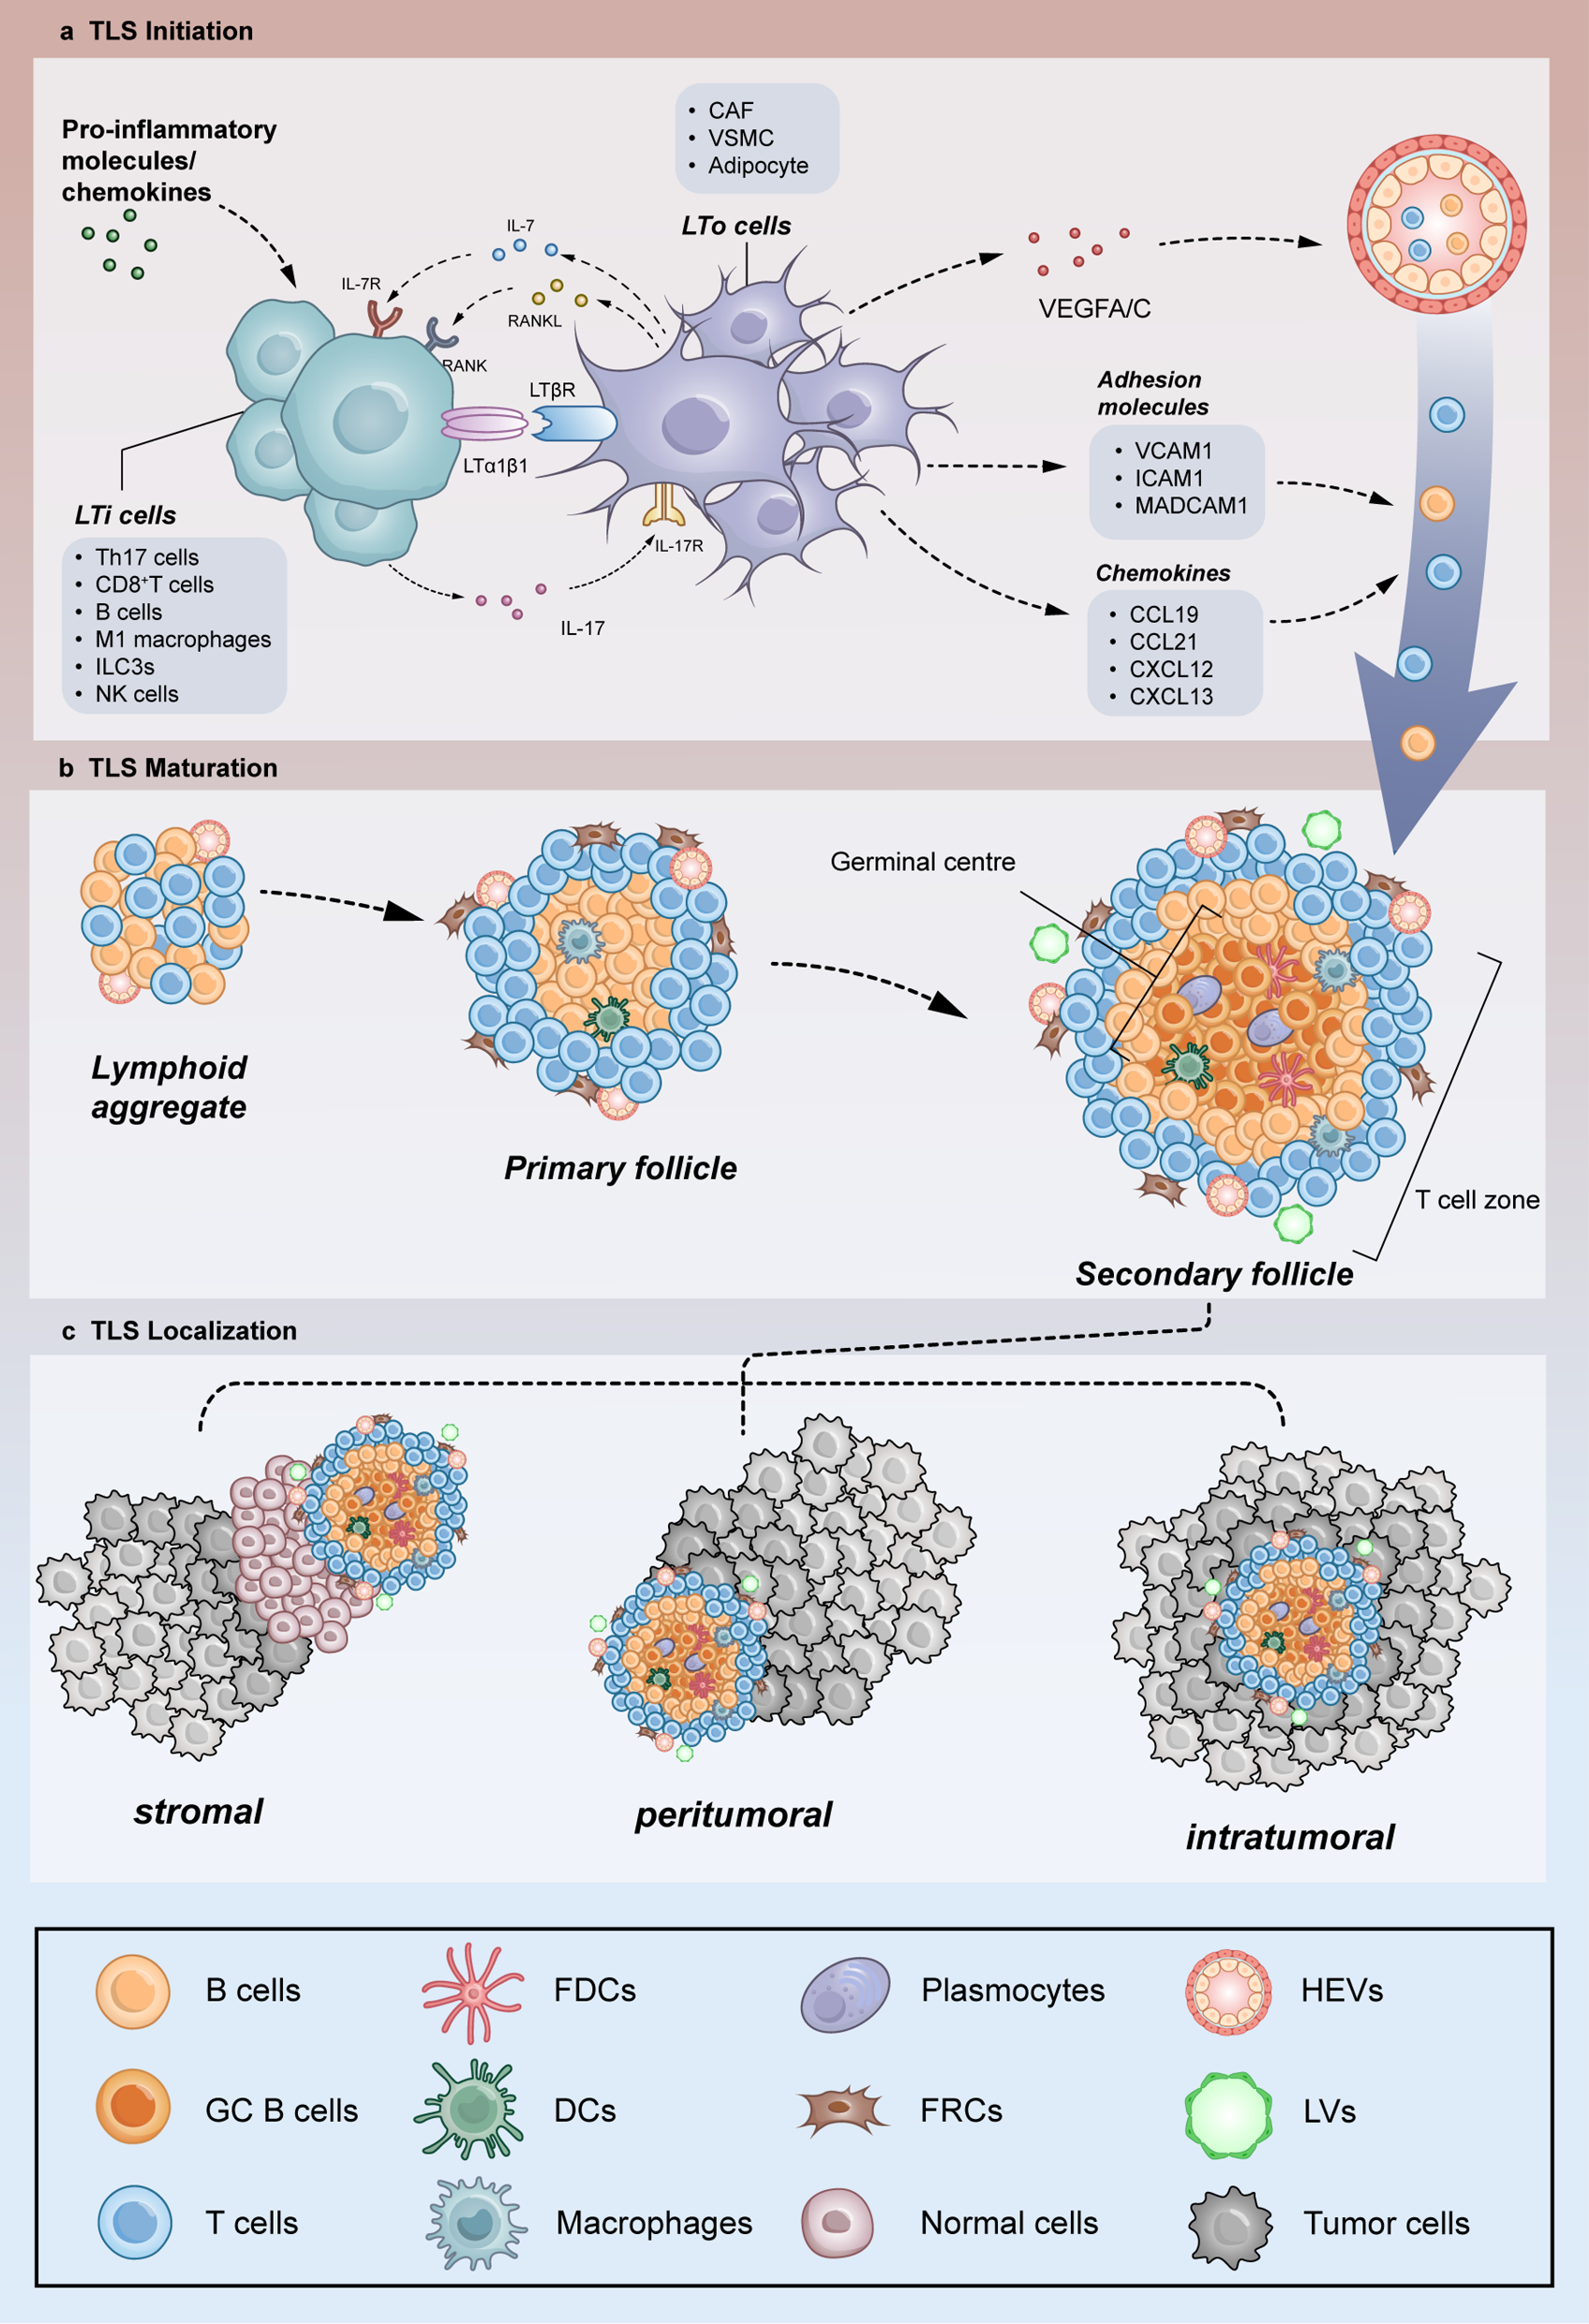 Tertiary lymphoid structural heterogeneity determines tumour immunity and prospects for clinical application